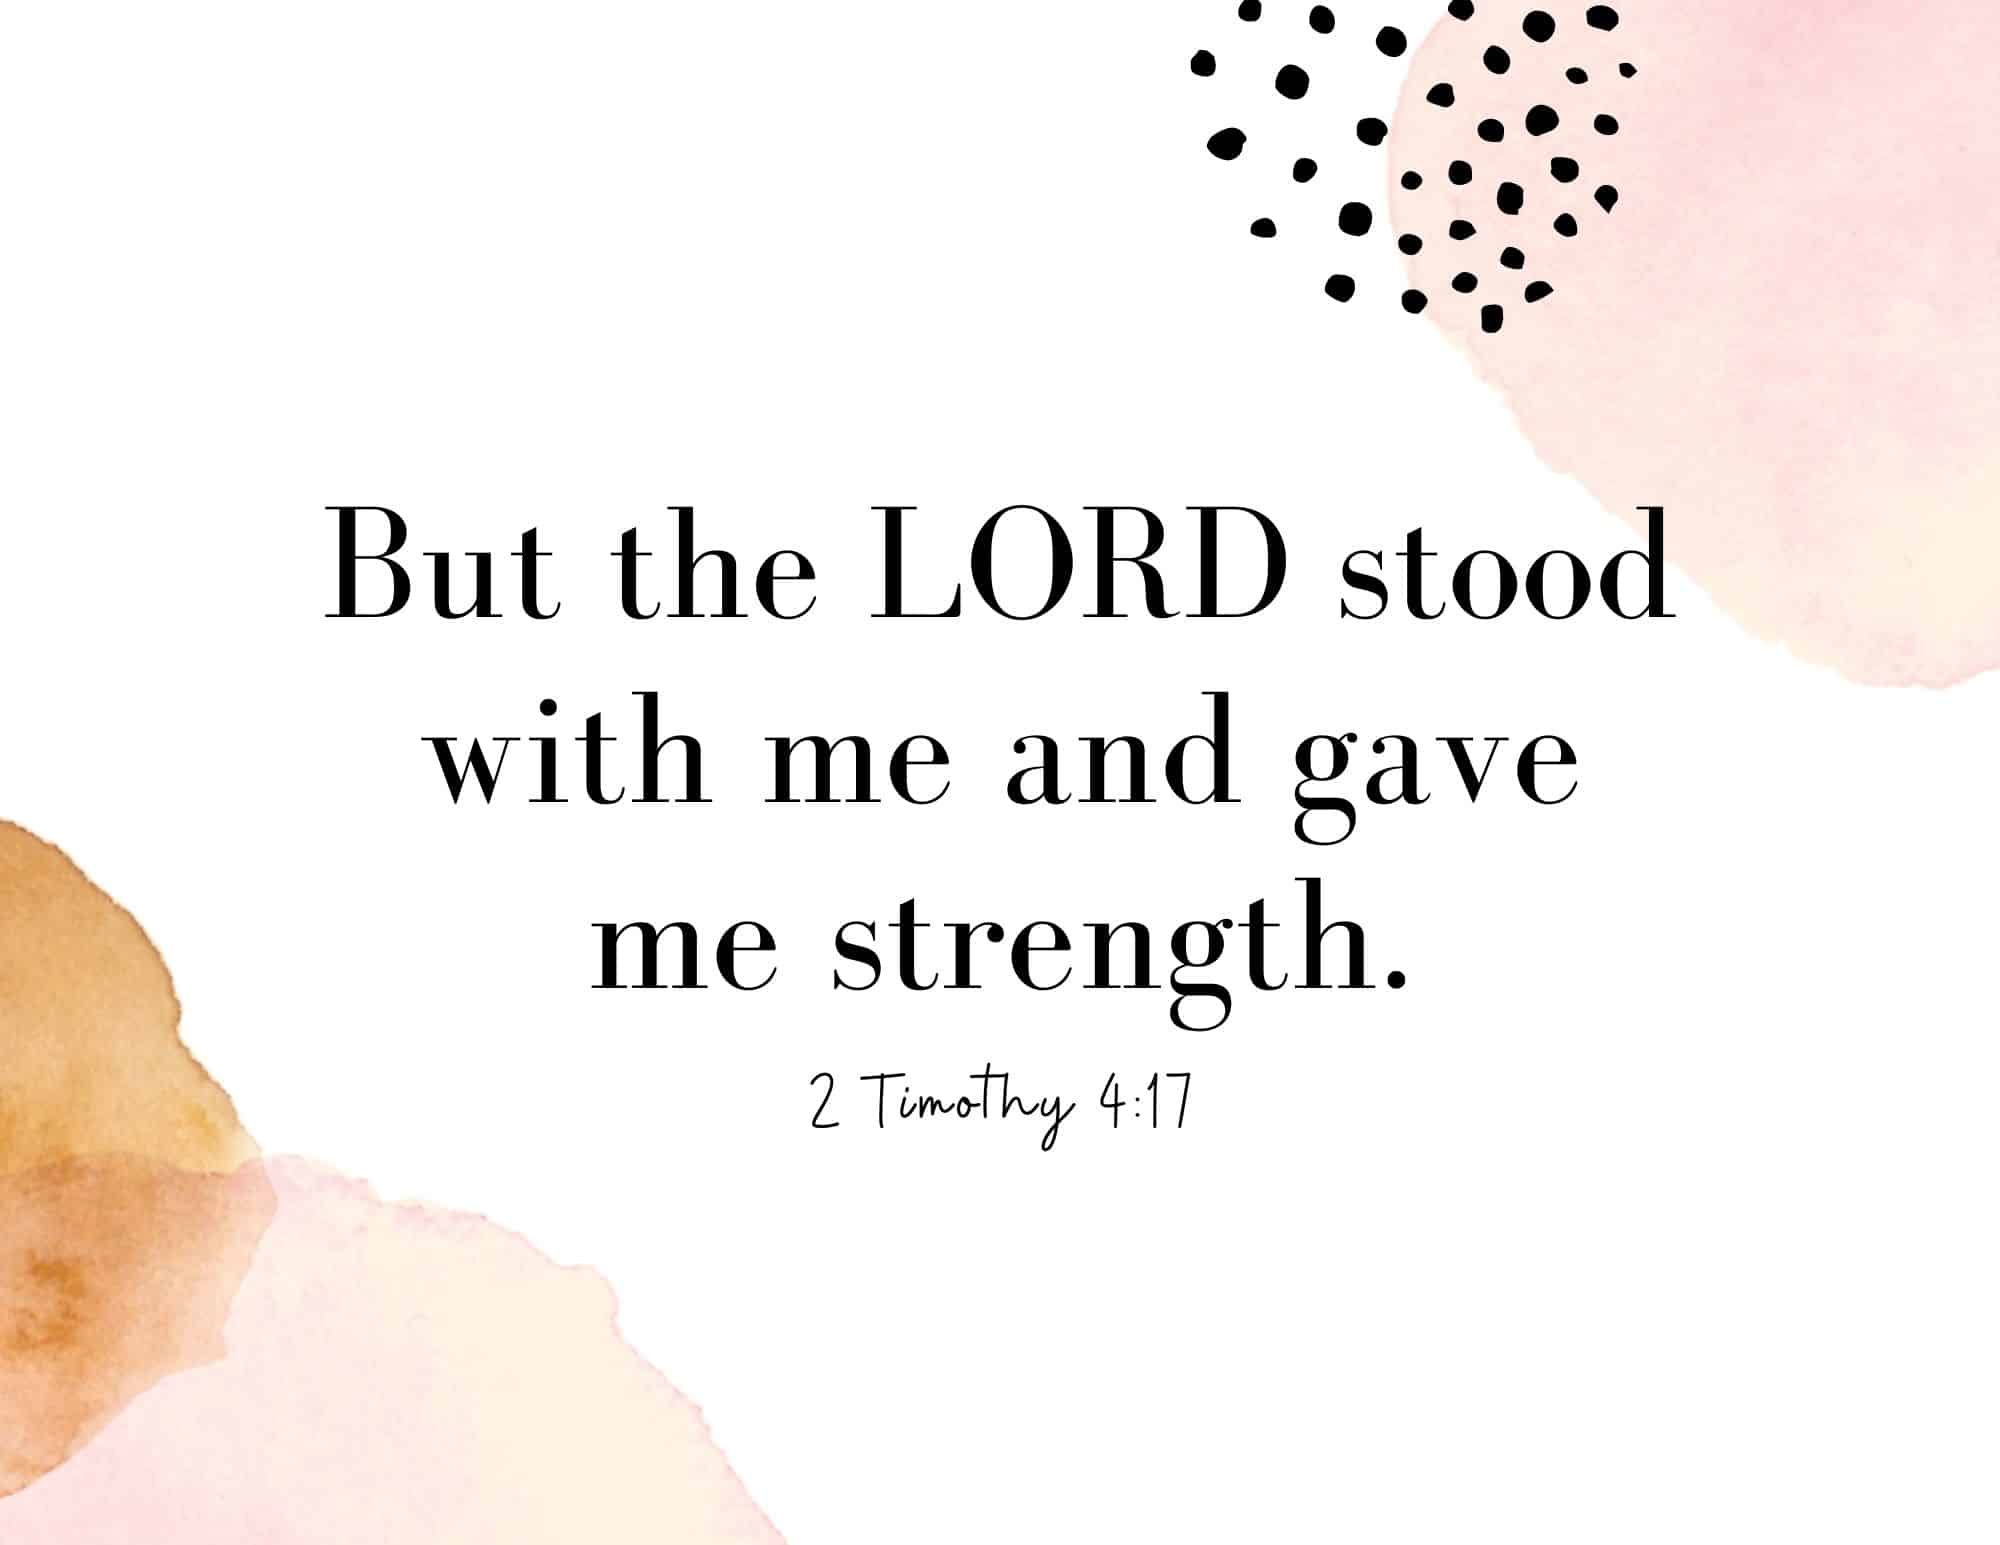 But the Lord stood with me and gave me strength - bible verse